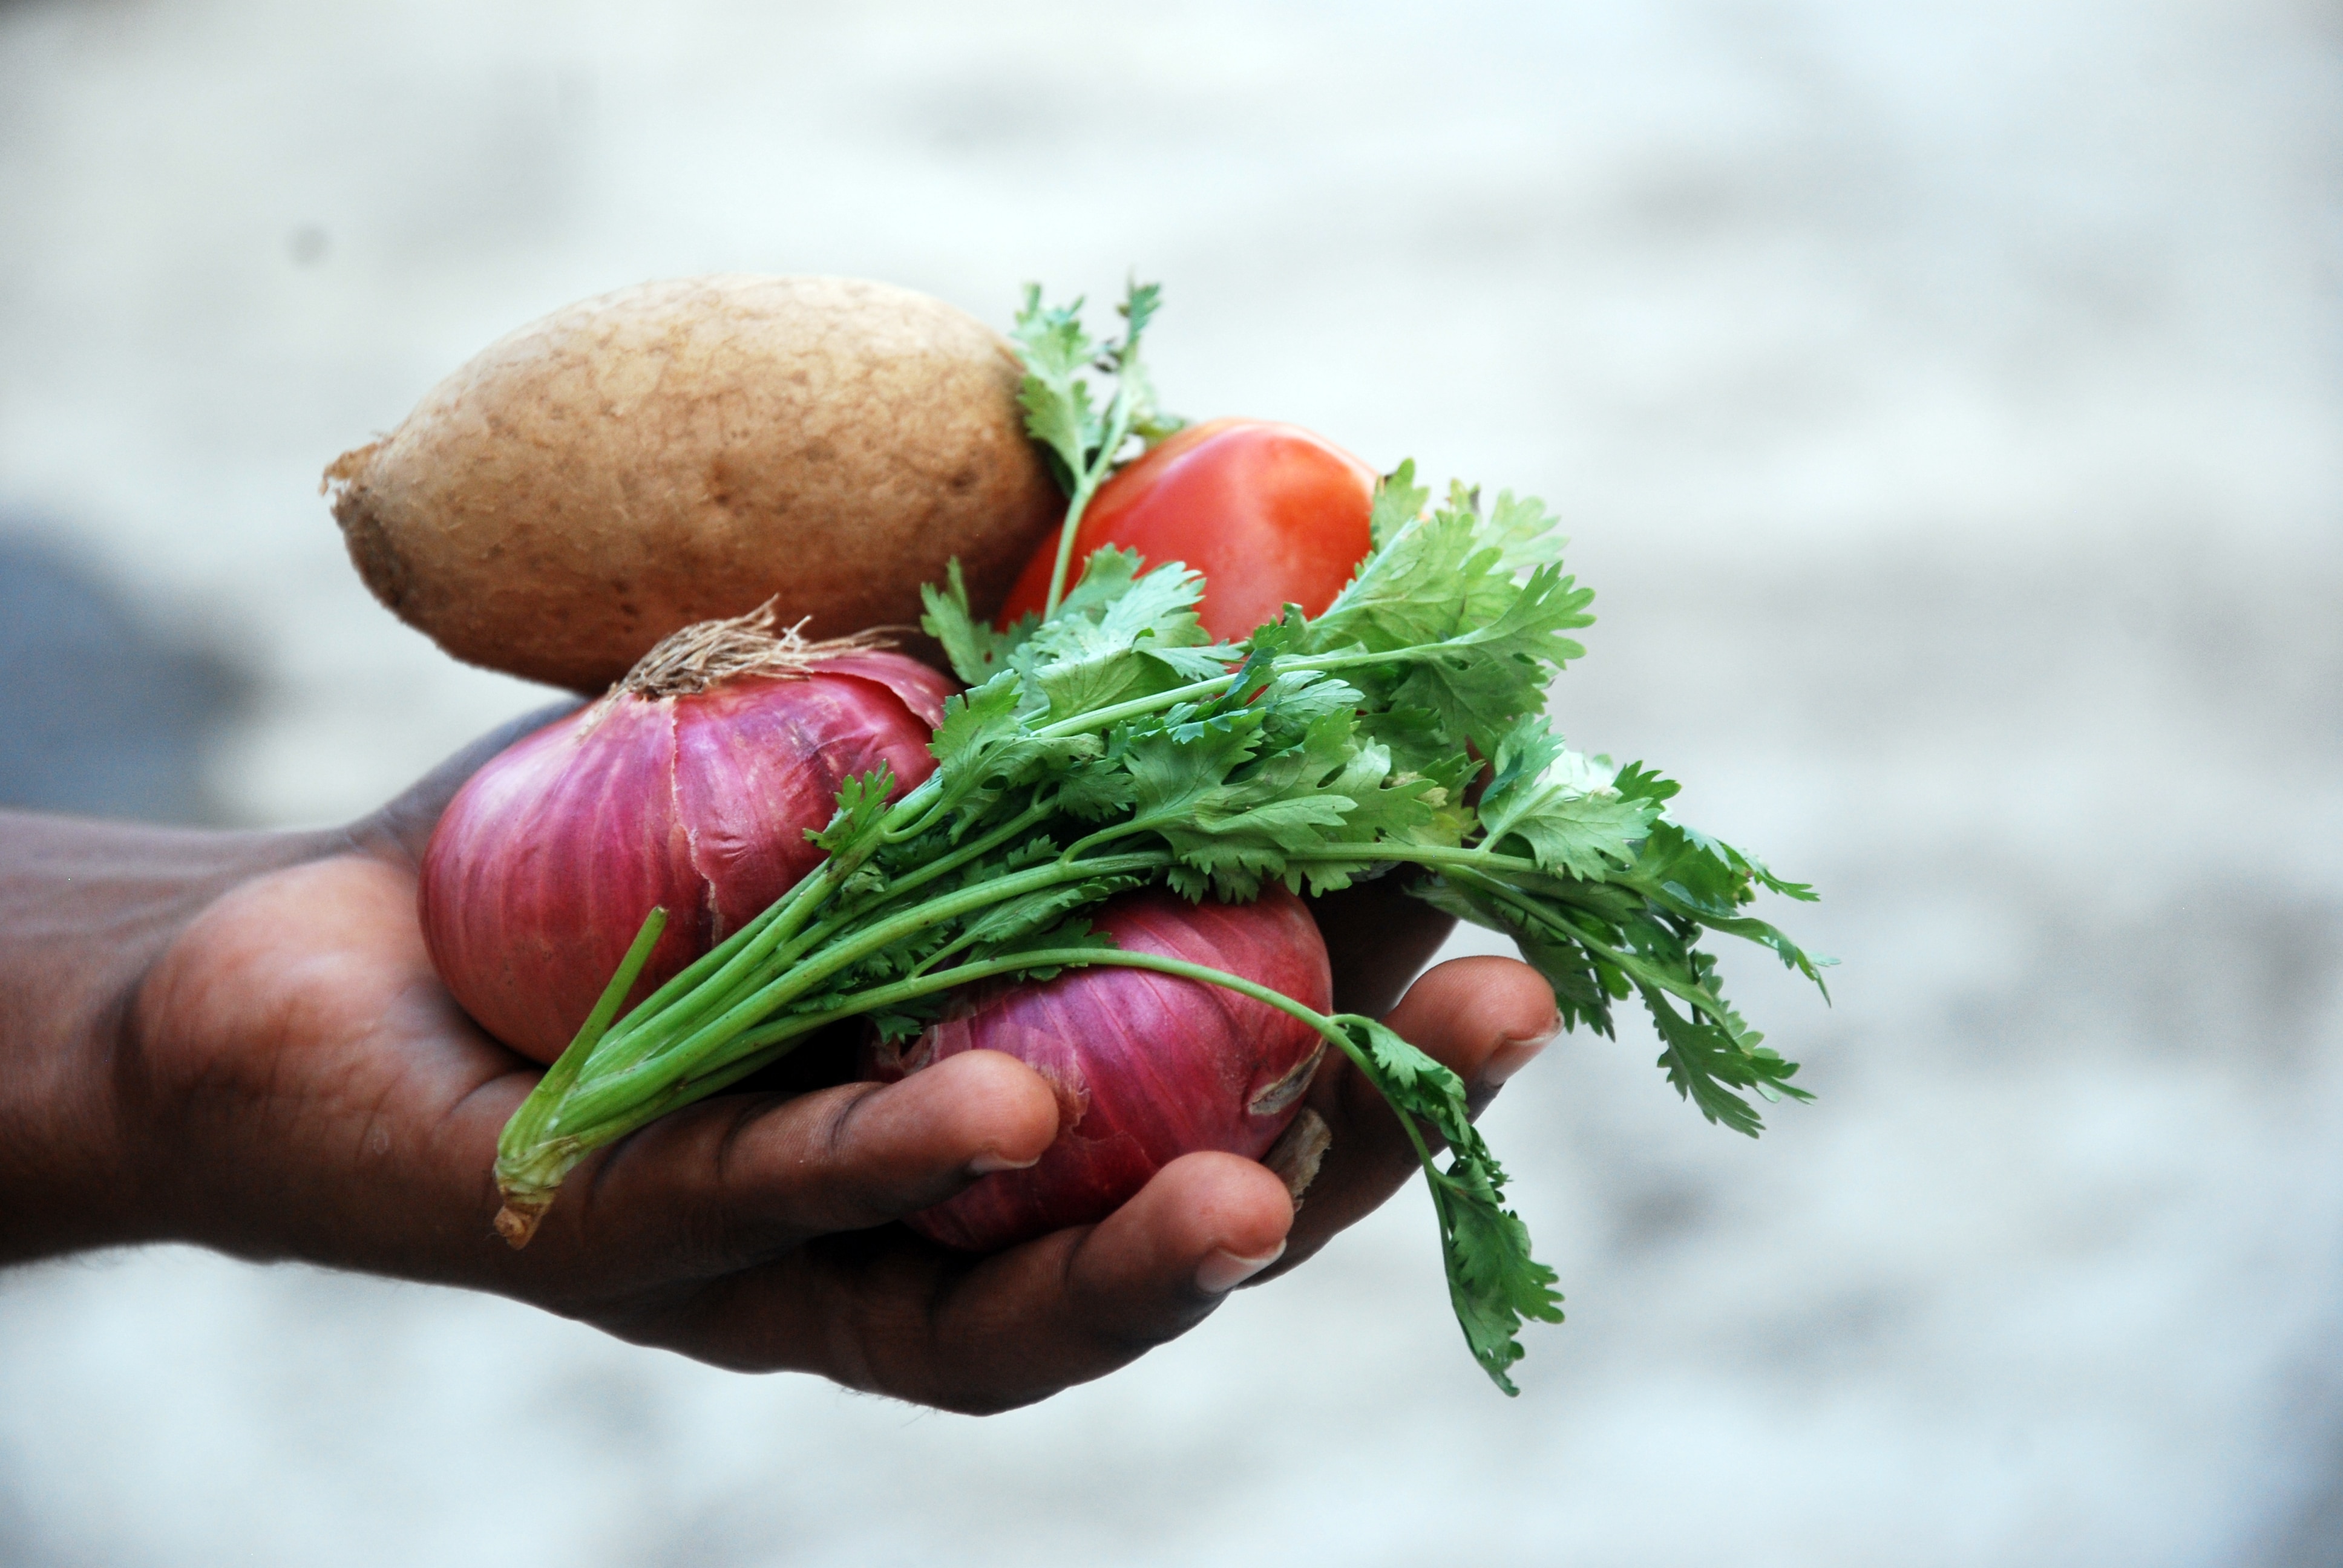 person holding vegetables on hand